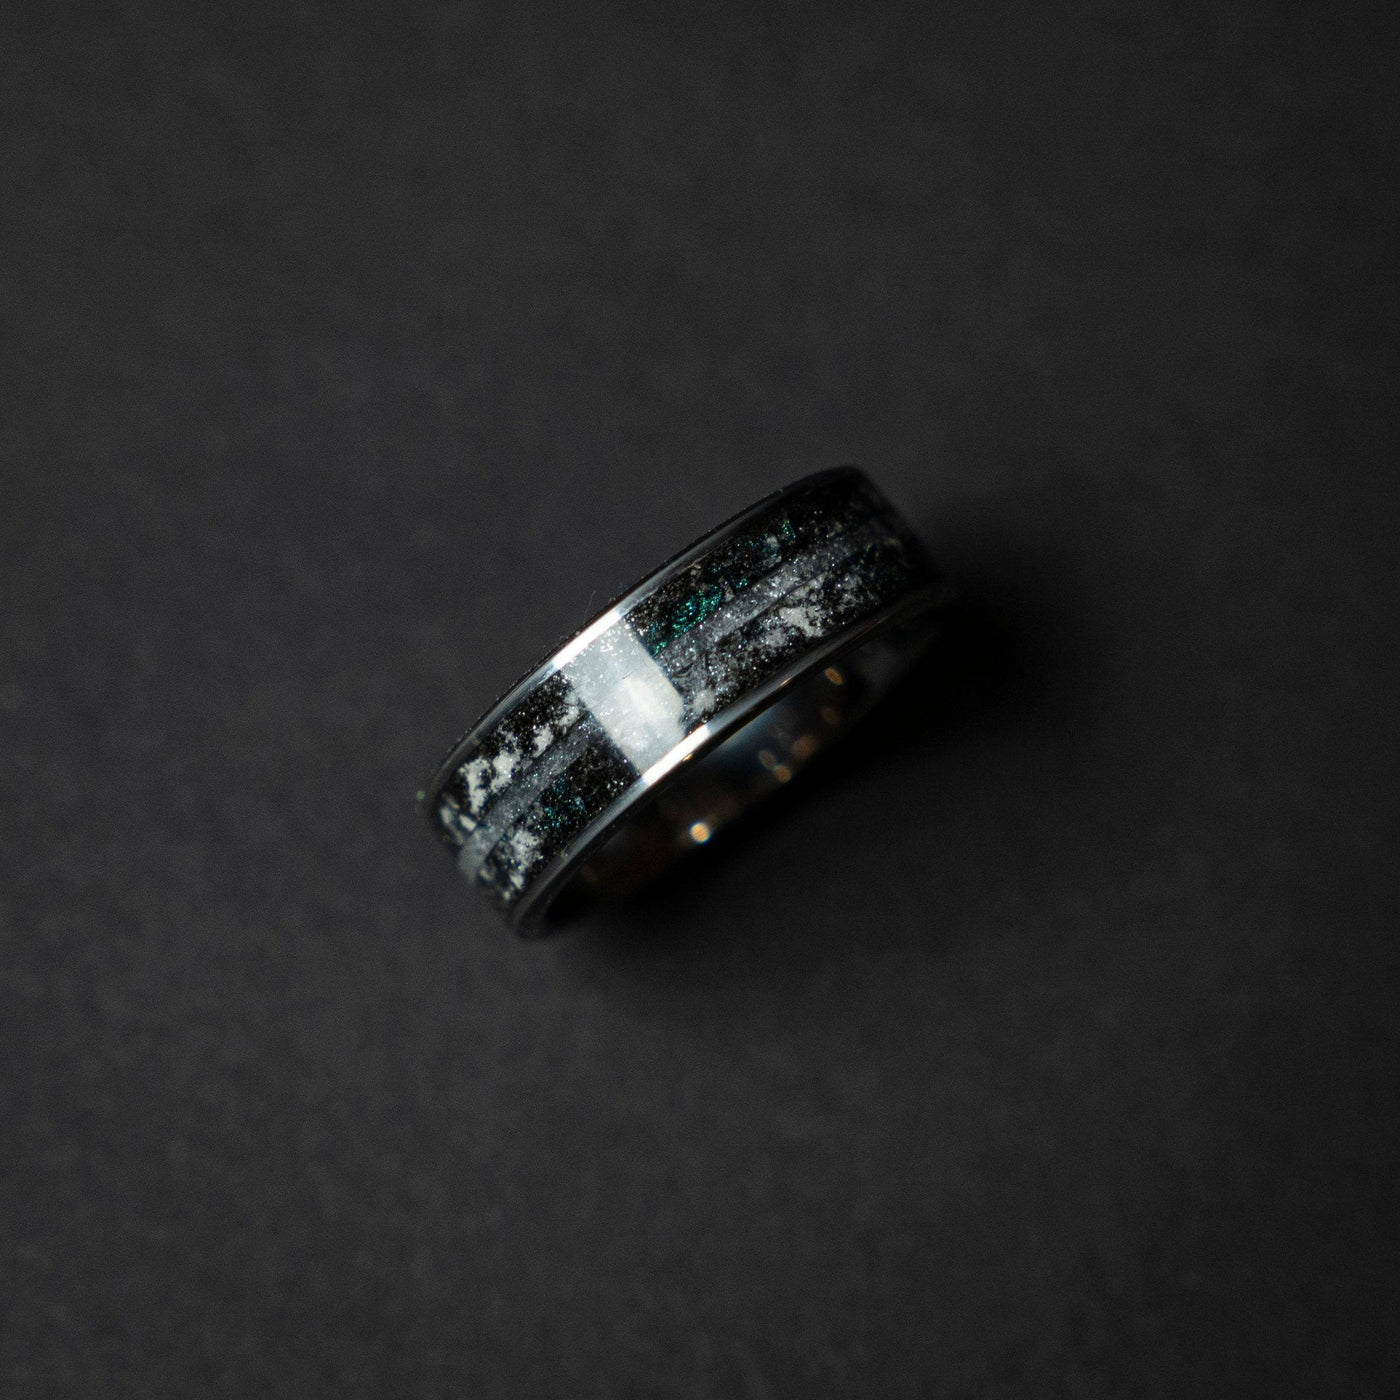 Tungsten ring with a line of Herkimer diamond, meteorite and glow